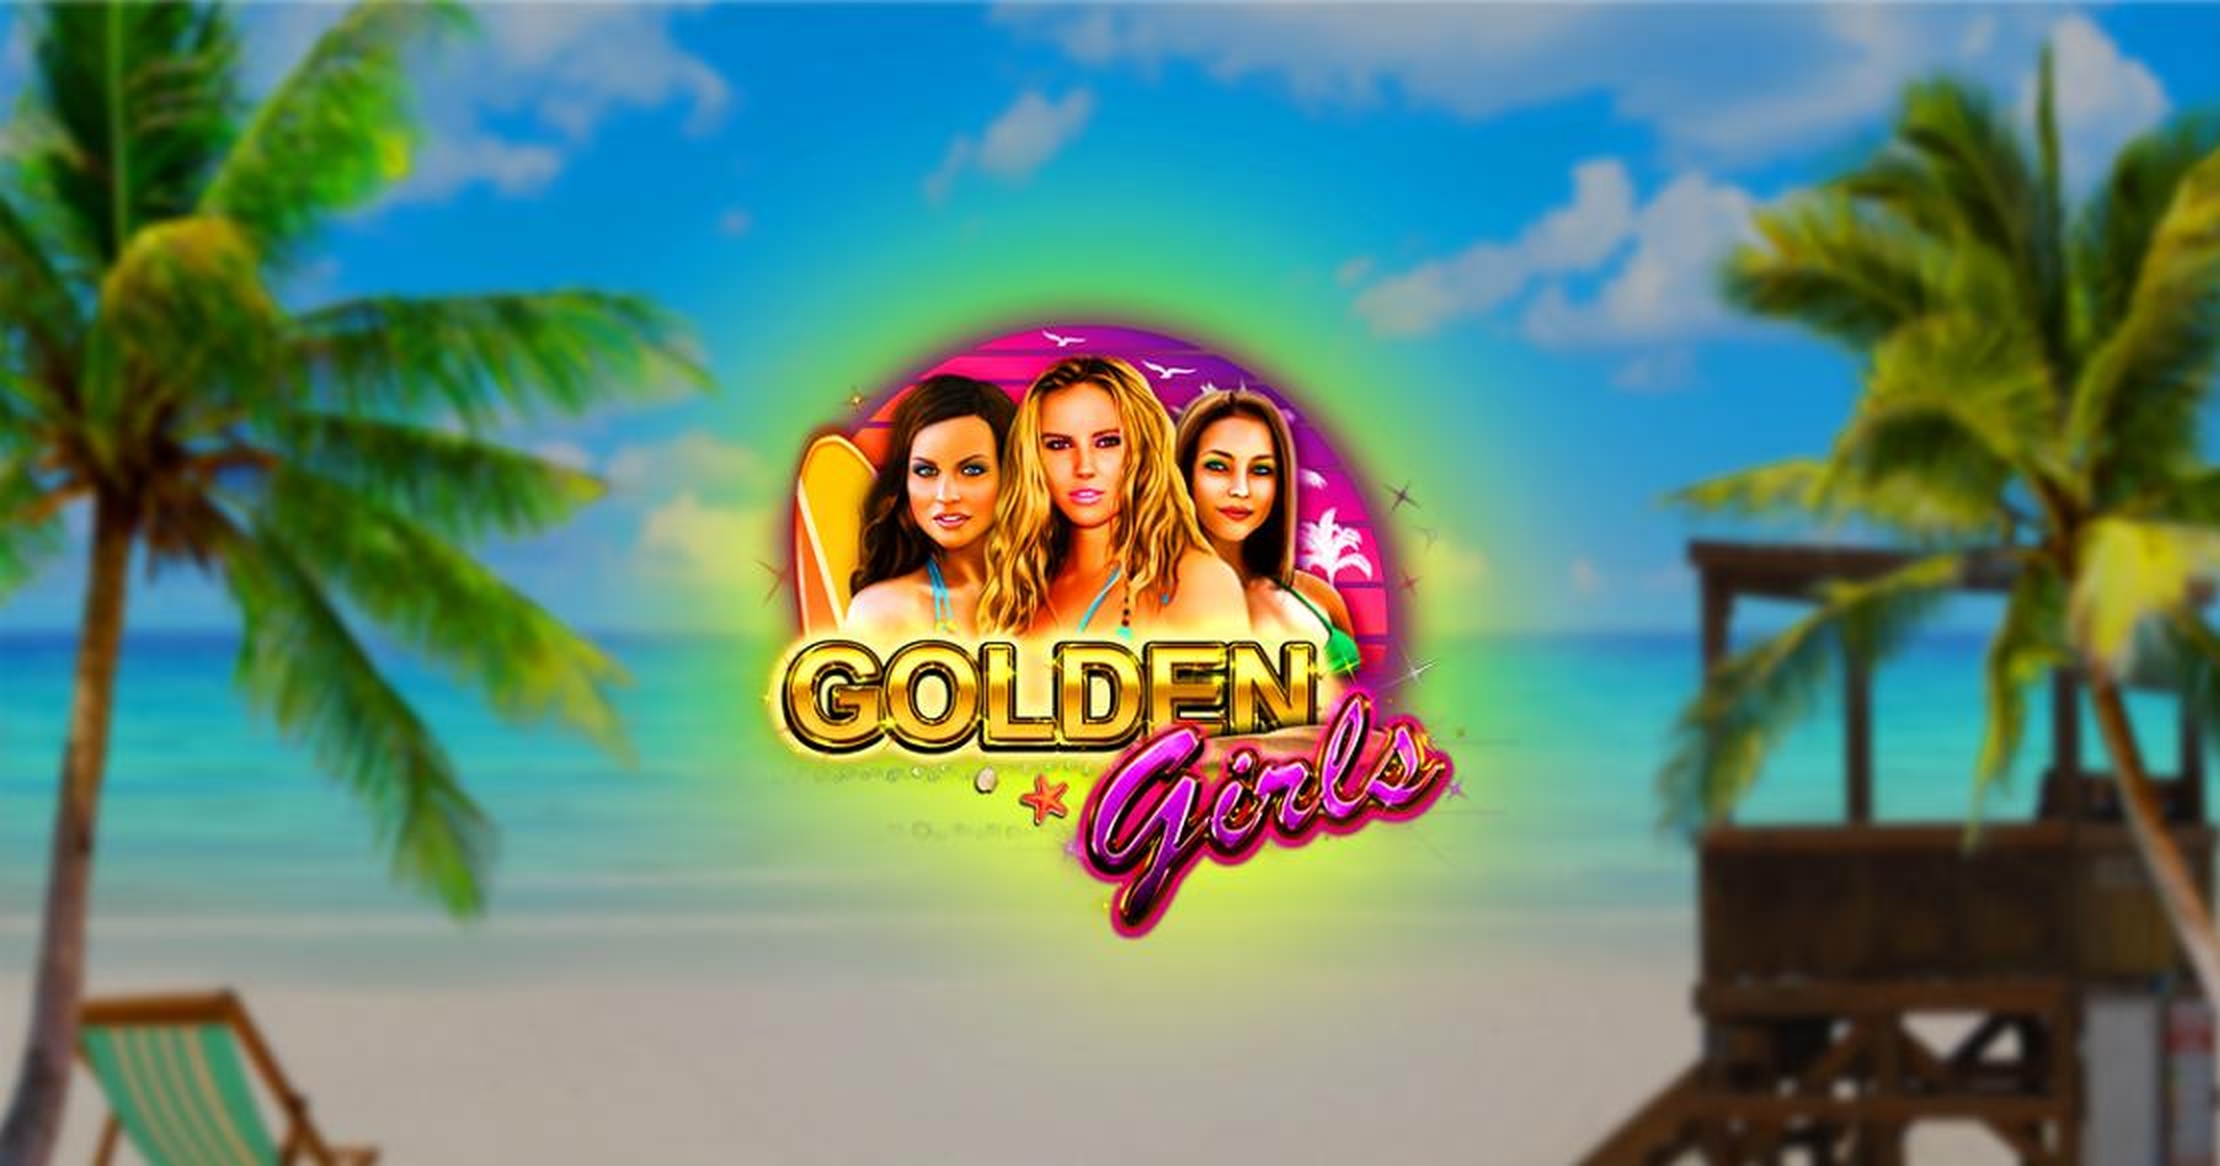 The Golden Girls Online Slot Demo Game by Booming Games